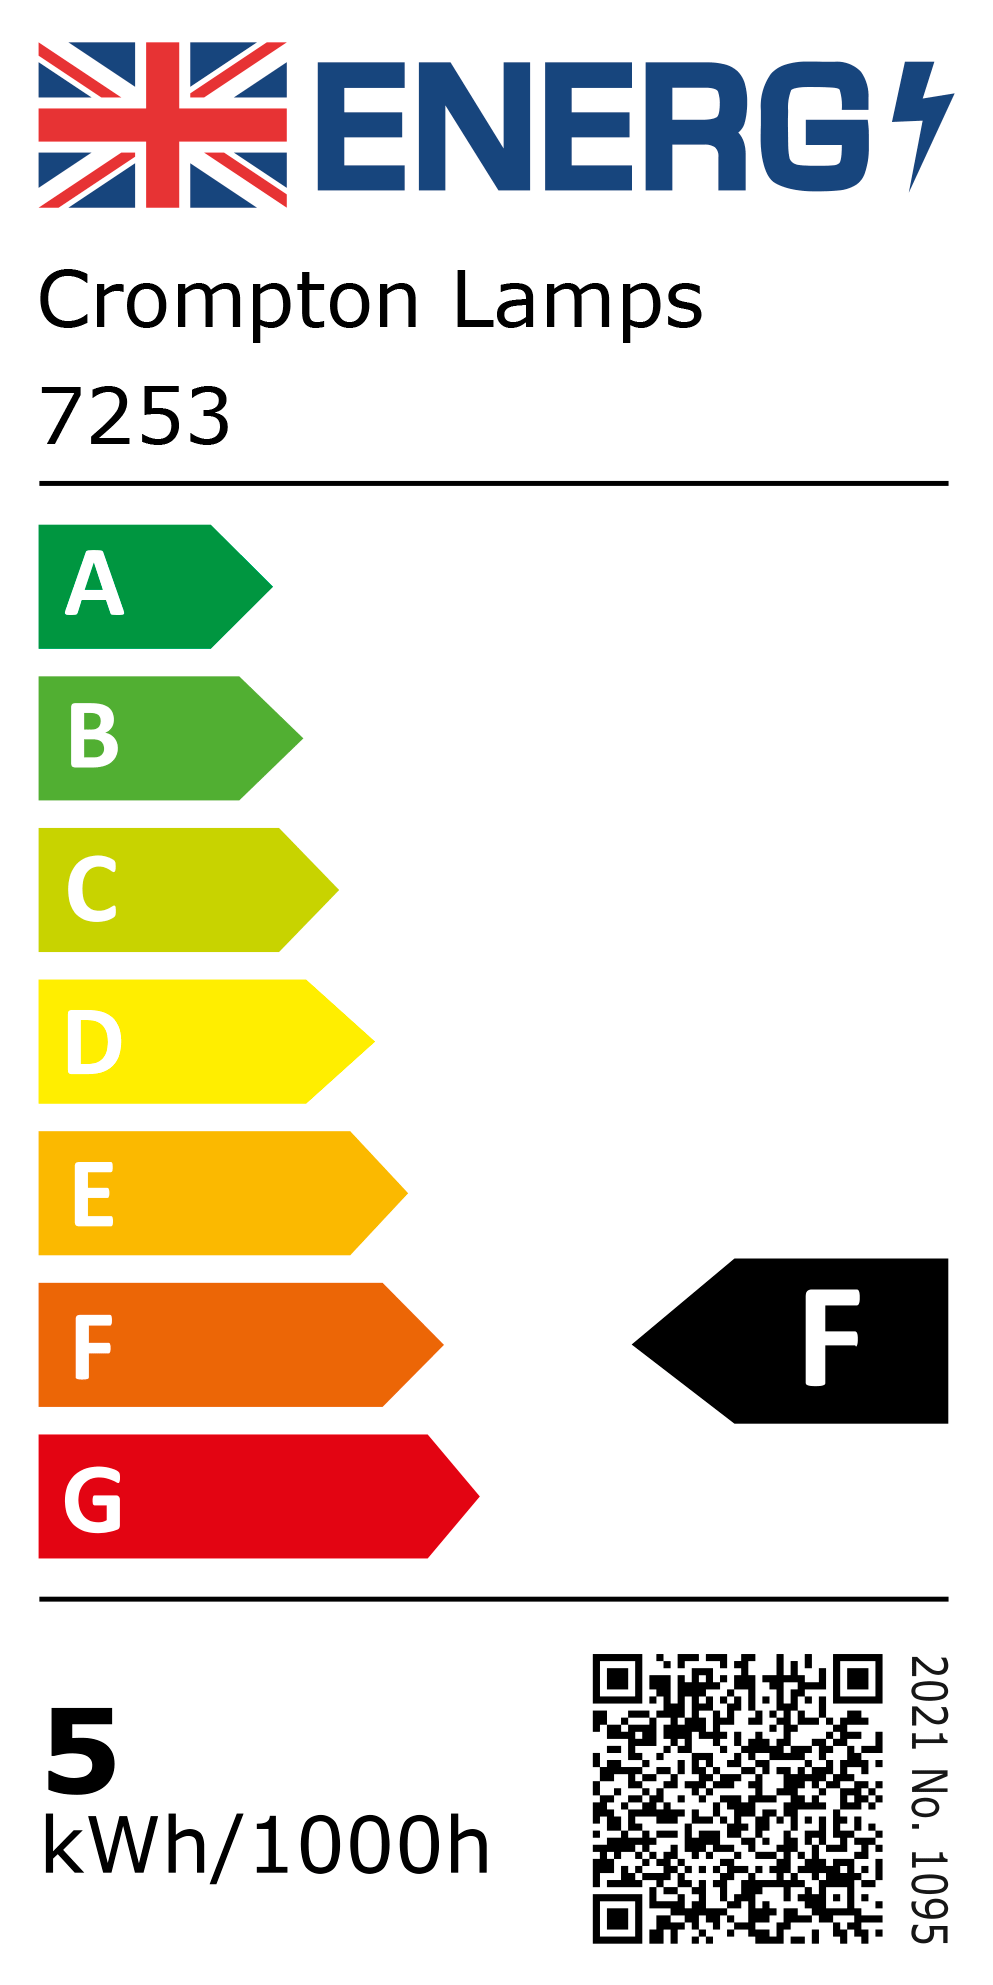 New 2021 Energy Rating Label: Stock Code 7253